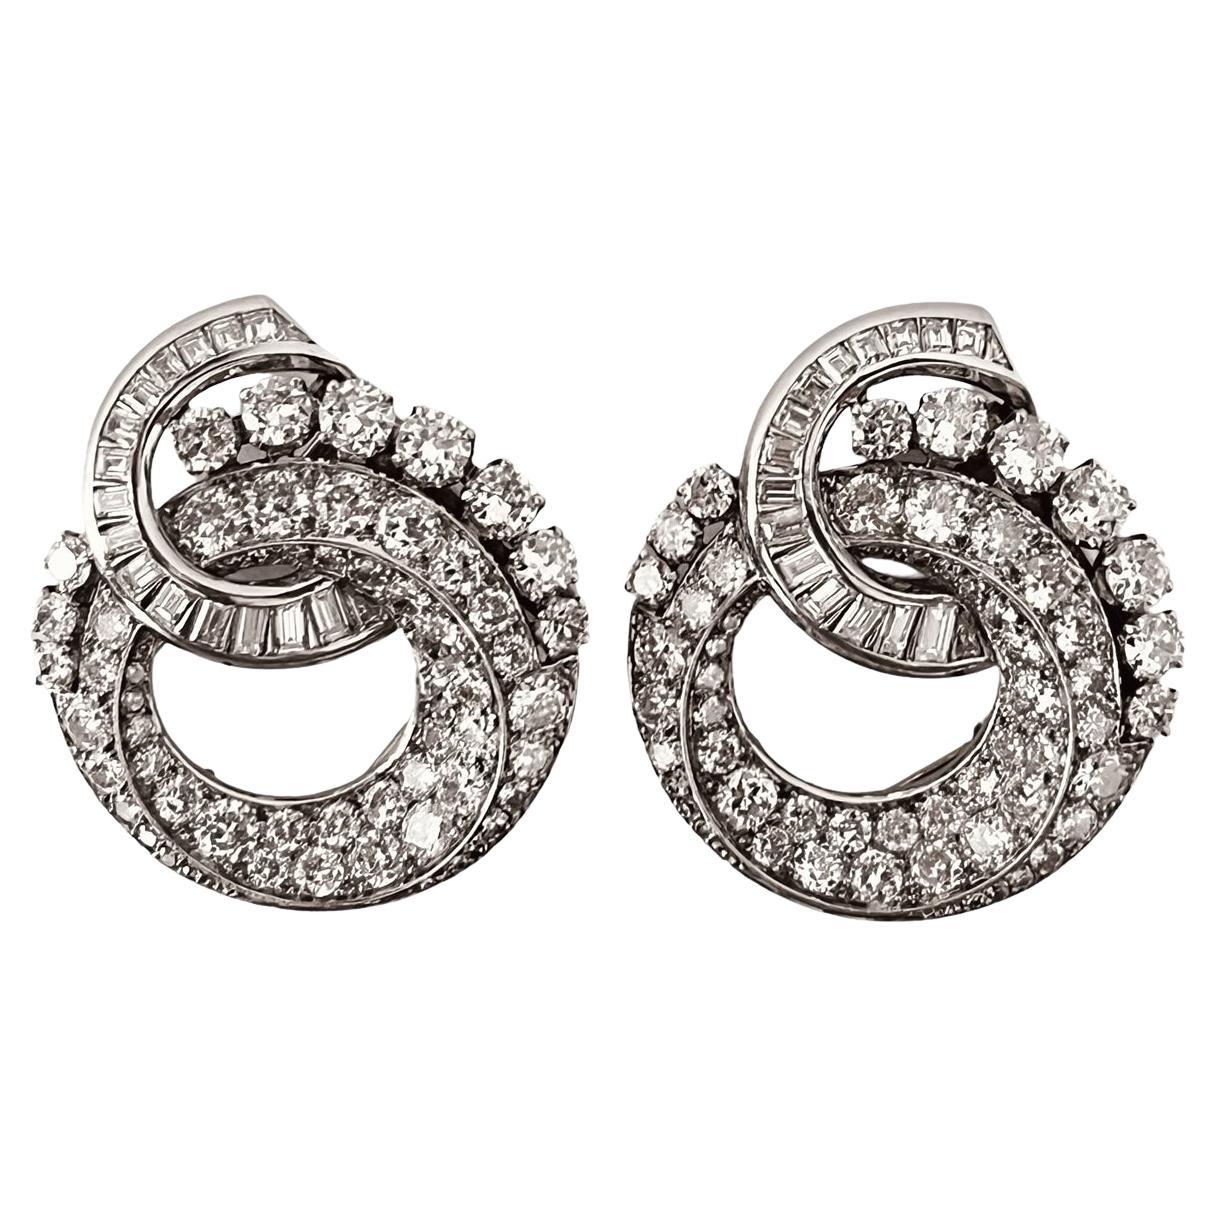 A Pair Of 10 Carats  Diamond Clip Brooches Mounted In Platinum. Circa 1930 For Sale